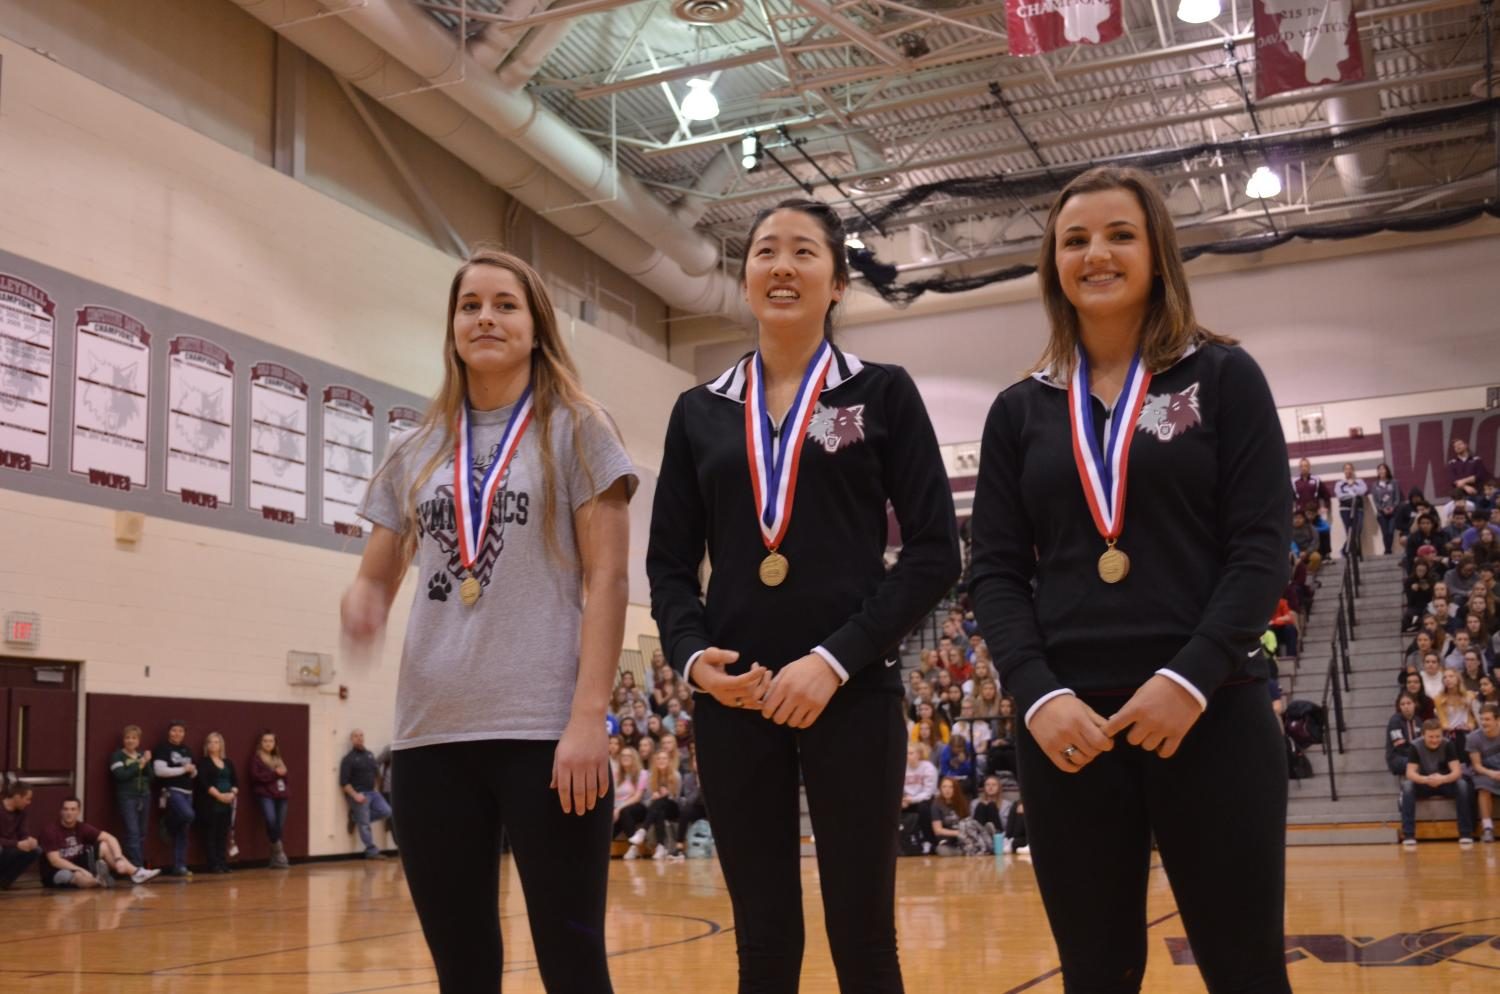 The Girls Gymnastics Prairie Ridge Co-op team dominated this year with regional, sectional, and now a second state championship. Pictured here are gymnasts Erinn Placko, Maddi Kim, and 
Kira Karlblom.